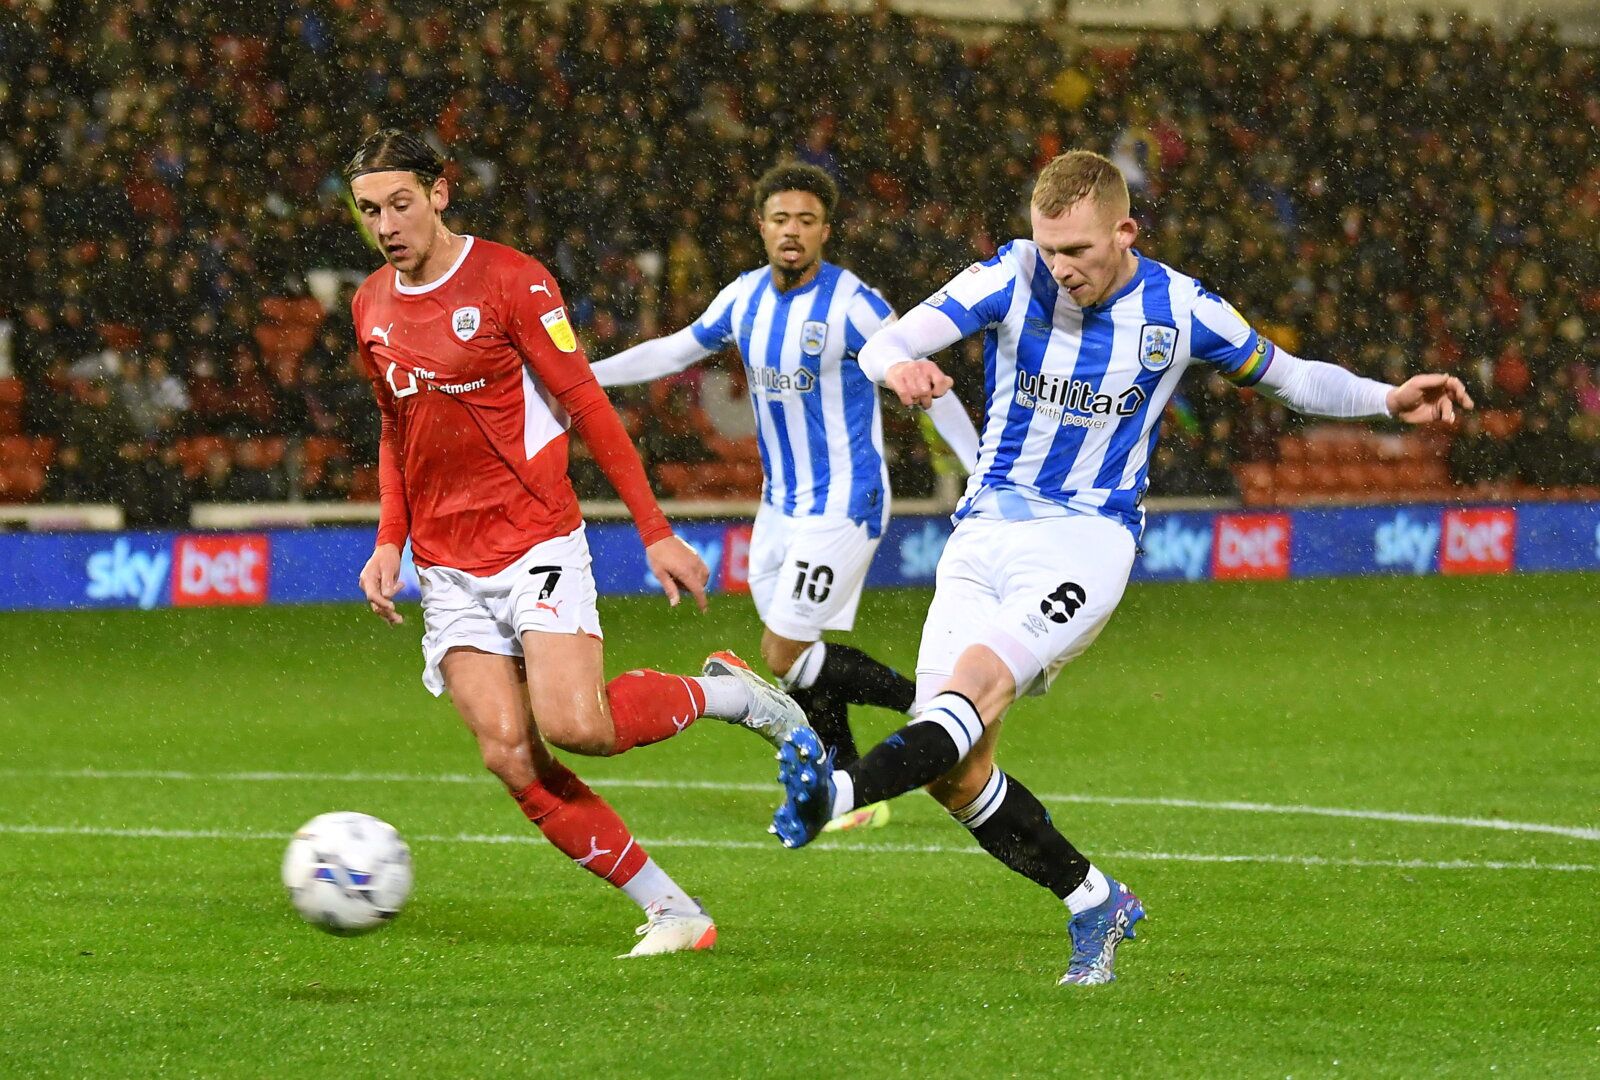 Soccer Football - Barnsley v Huddersfield Town - Oakwell, Barnsley, Britain - December 4, 2021  Huddersfield Town's Lewis O'Brien scores their first goal  Action Images/Paul Burrows  EDITORIAL USE ONLY. No use with unauthorized audio, video, data, fixture lists, club/league logos or 